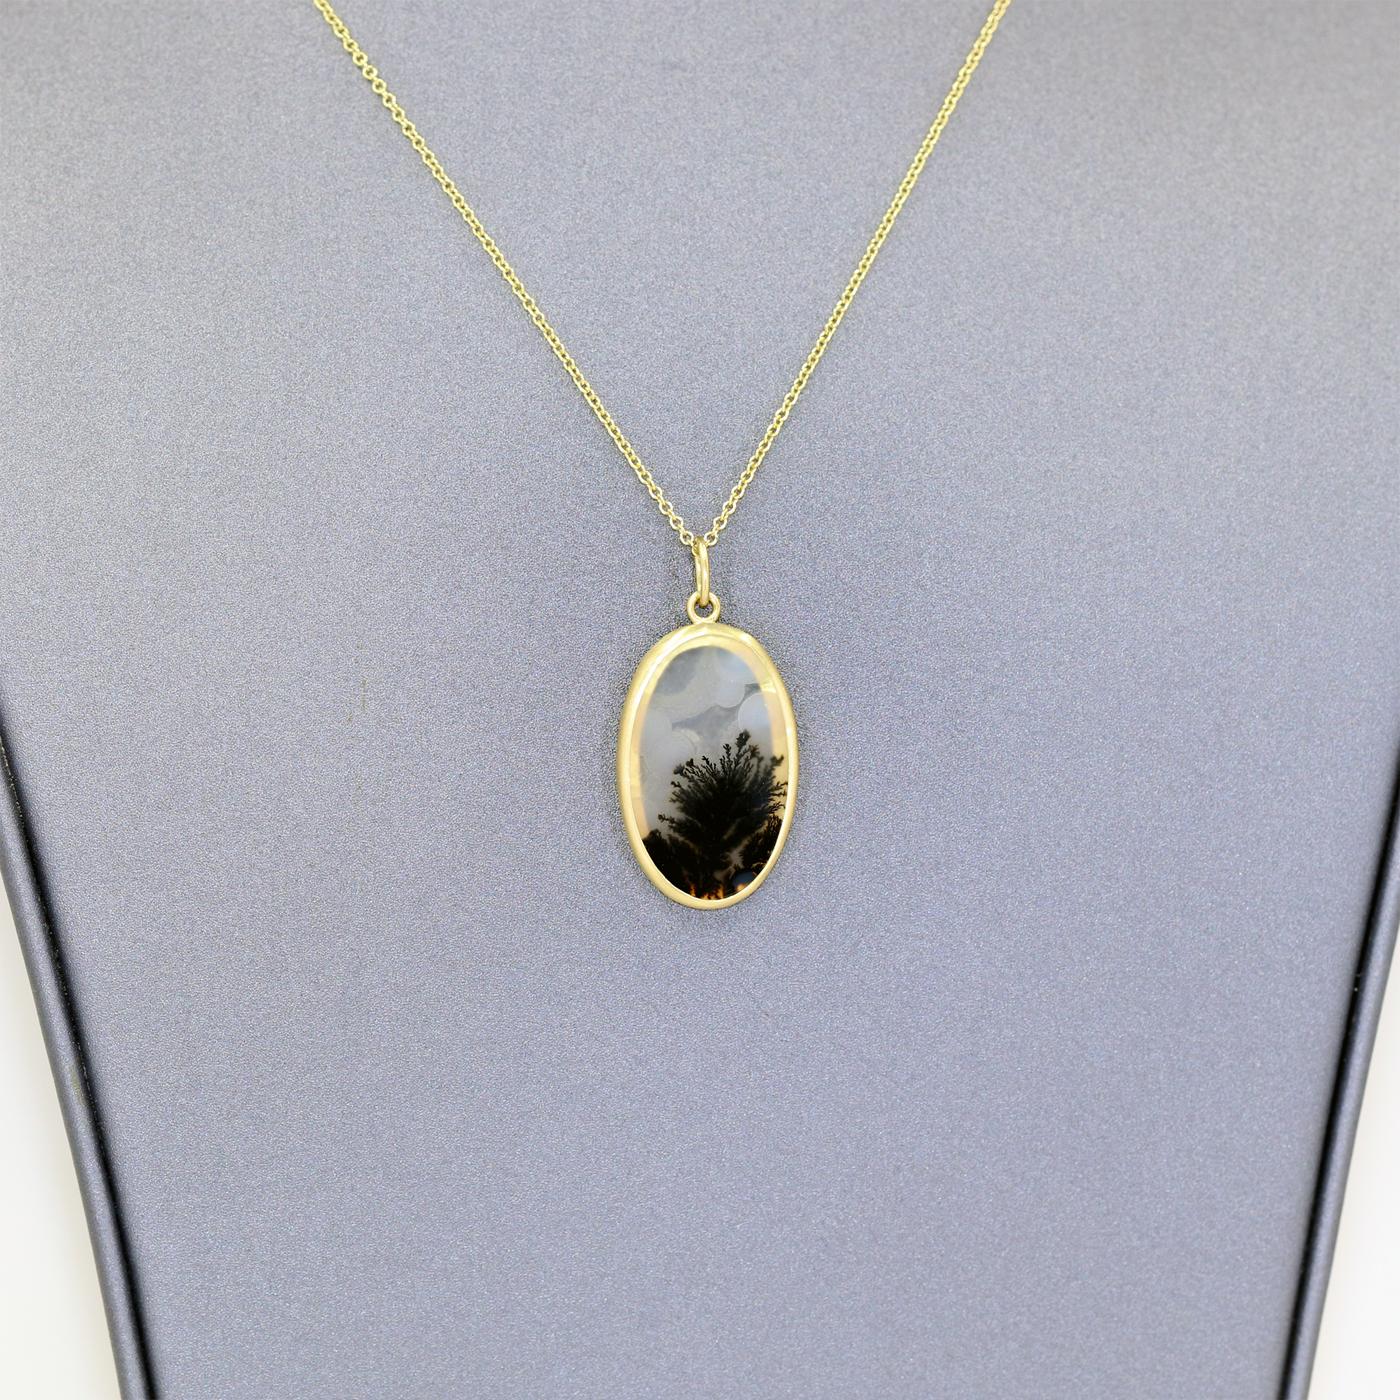 Oval Cut Translucent Dendrite Agate Oval One of a Kind Pendant Necklace, Monica Marcella